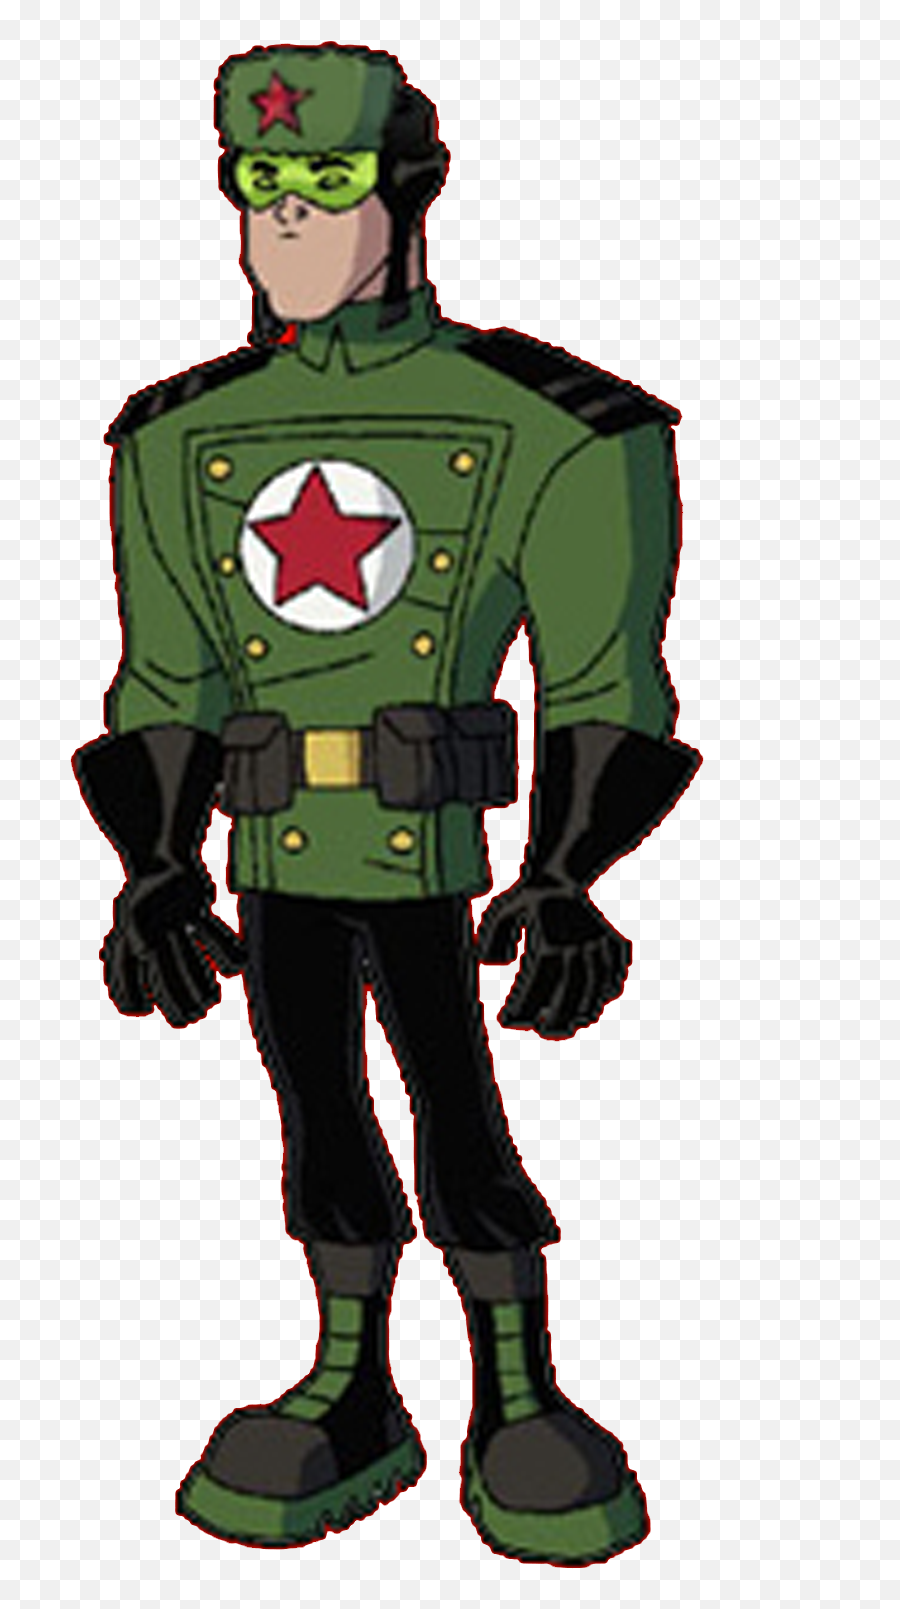 Red Star - Teen Titans 2003 Red Star Emoji,Red Star Png